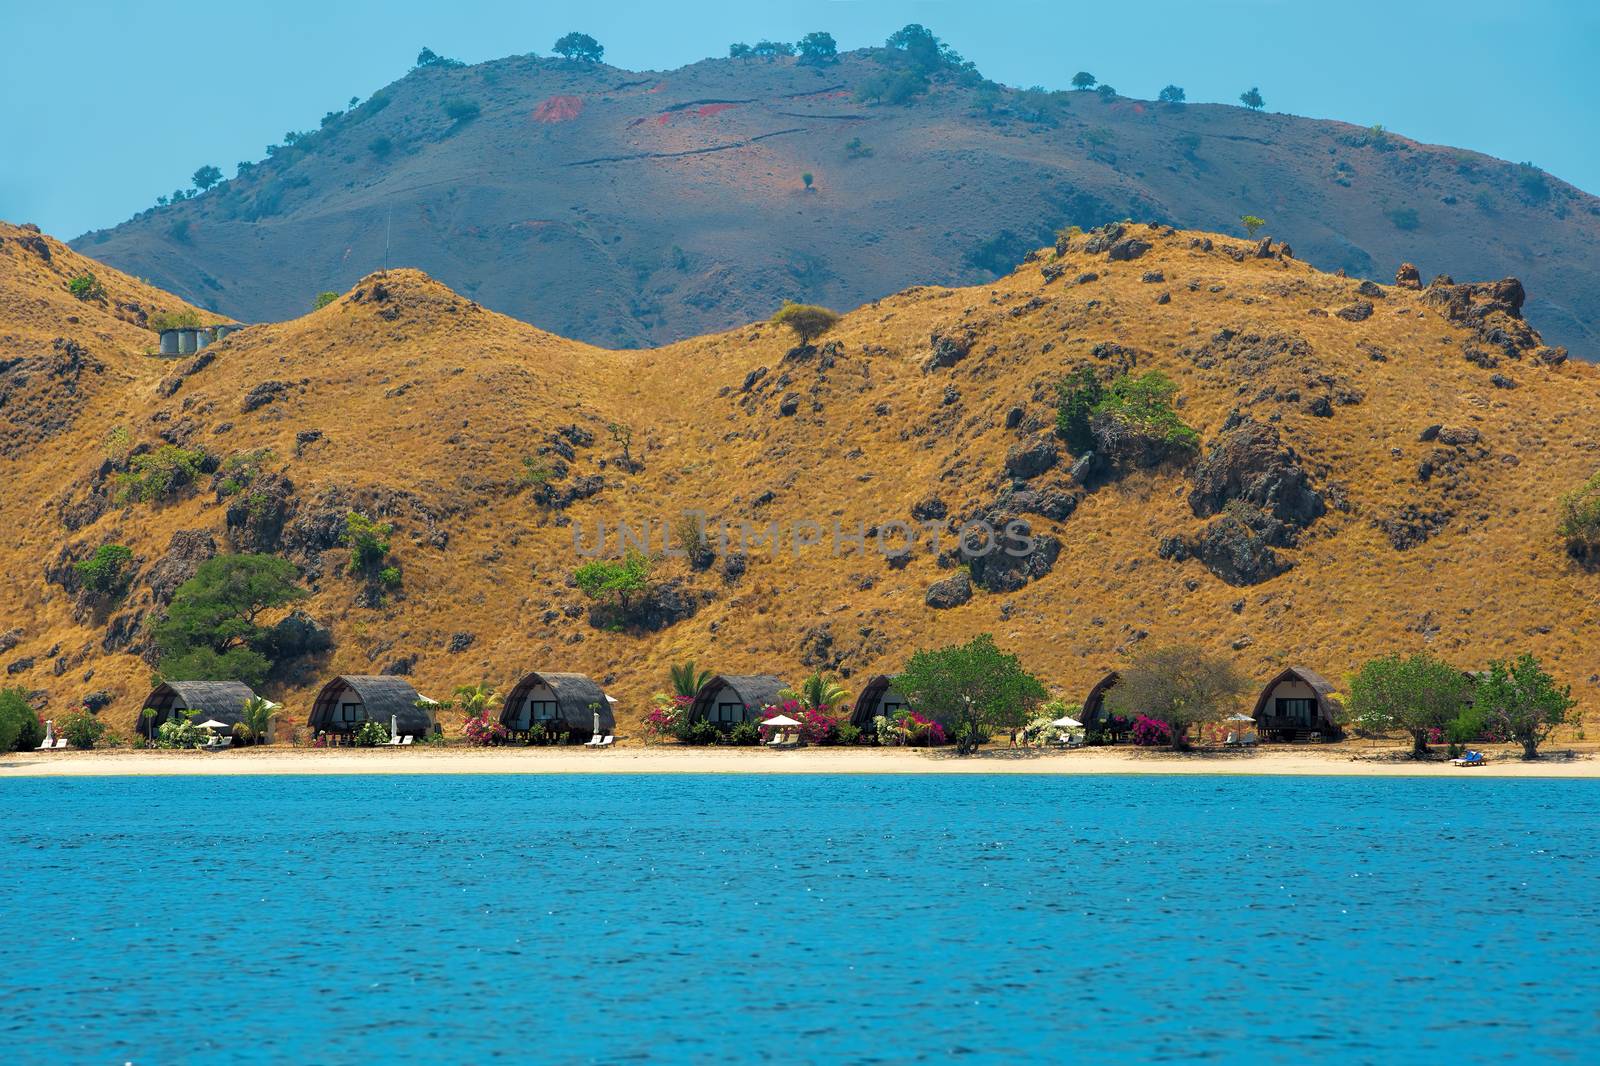 Bungalows on the beach in Komodo national park